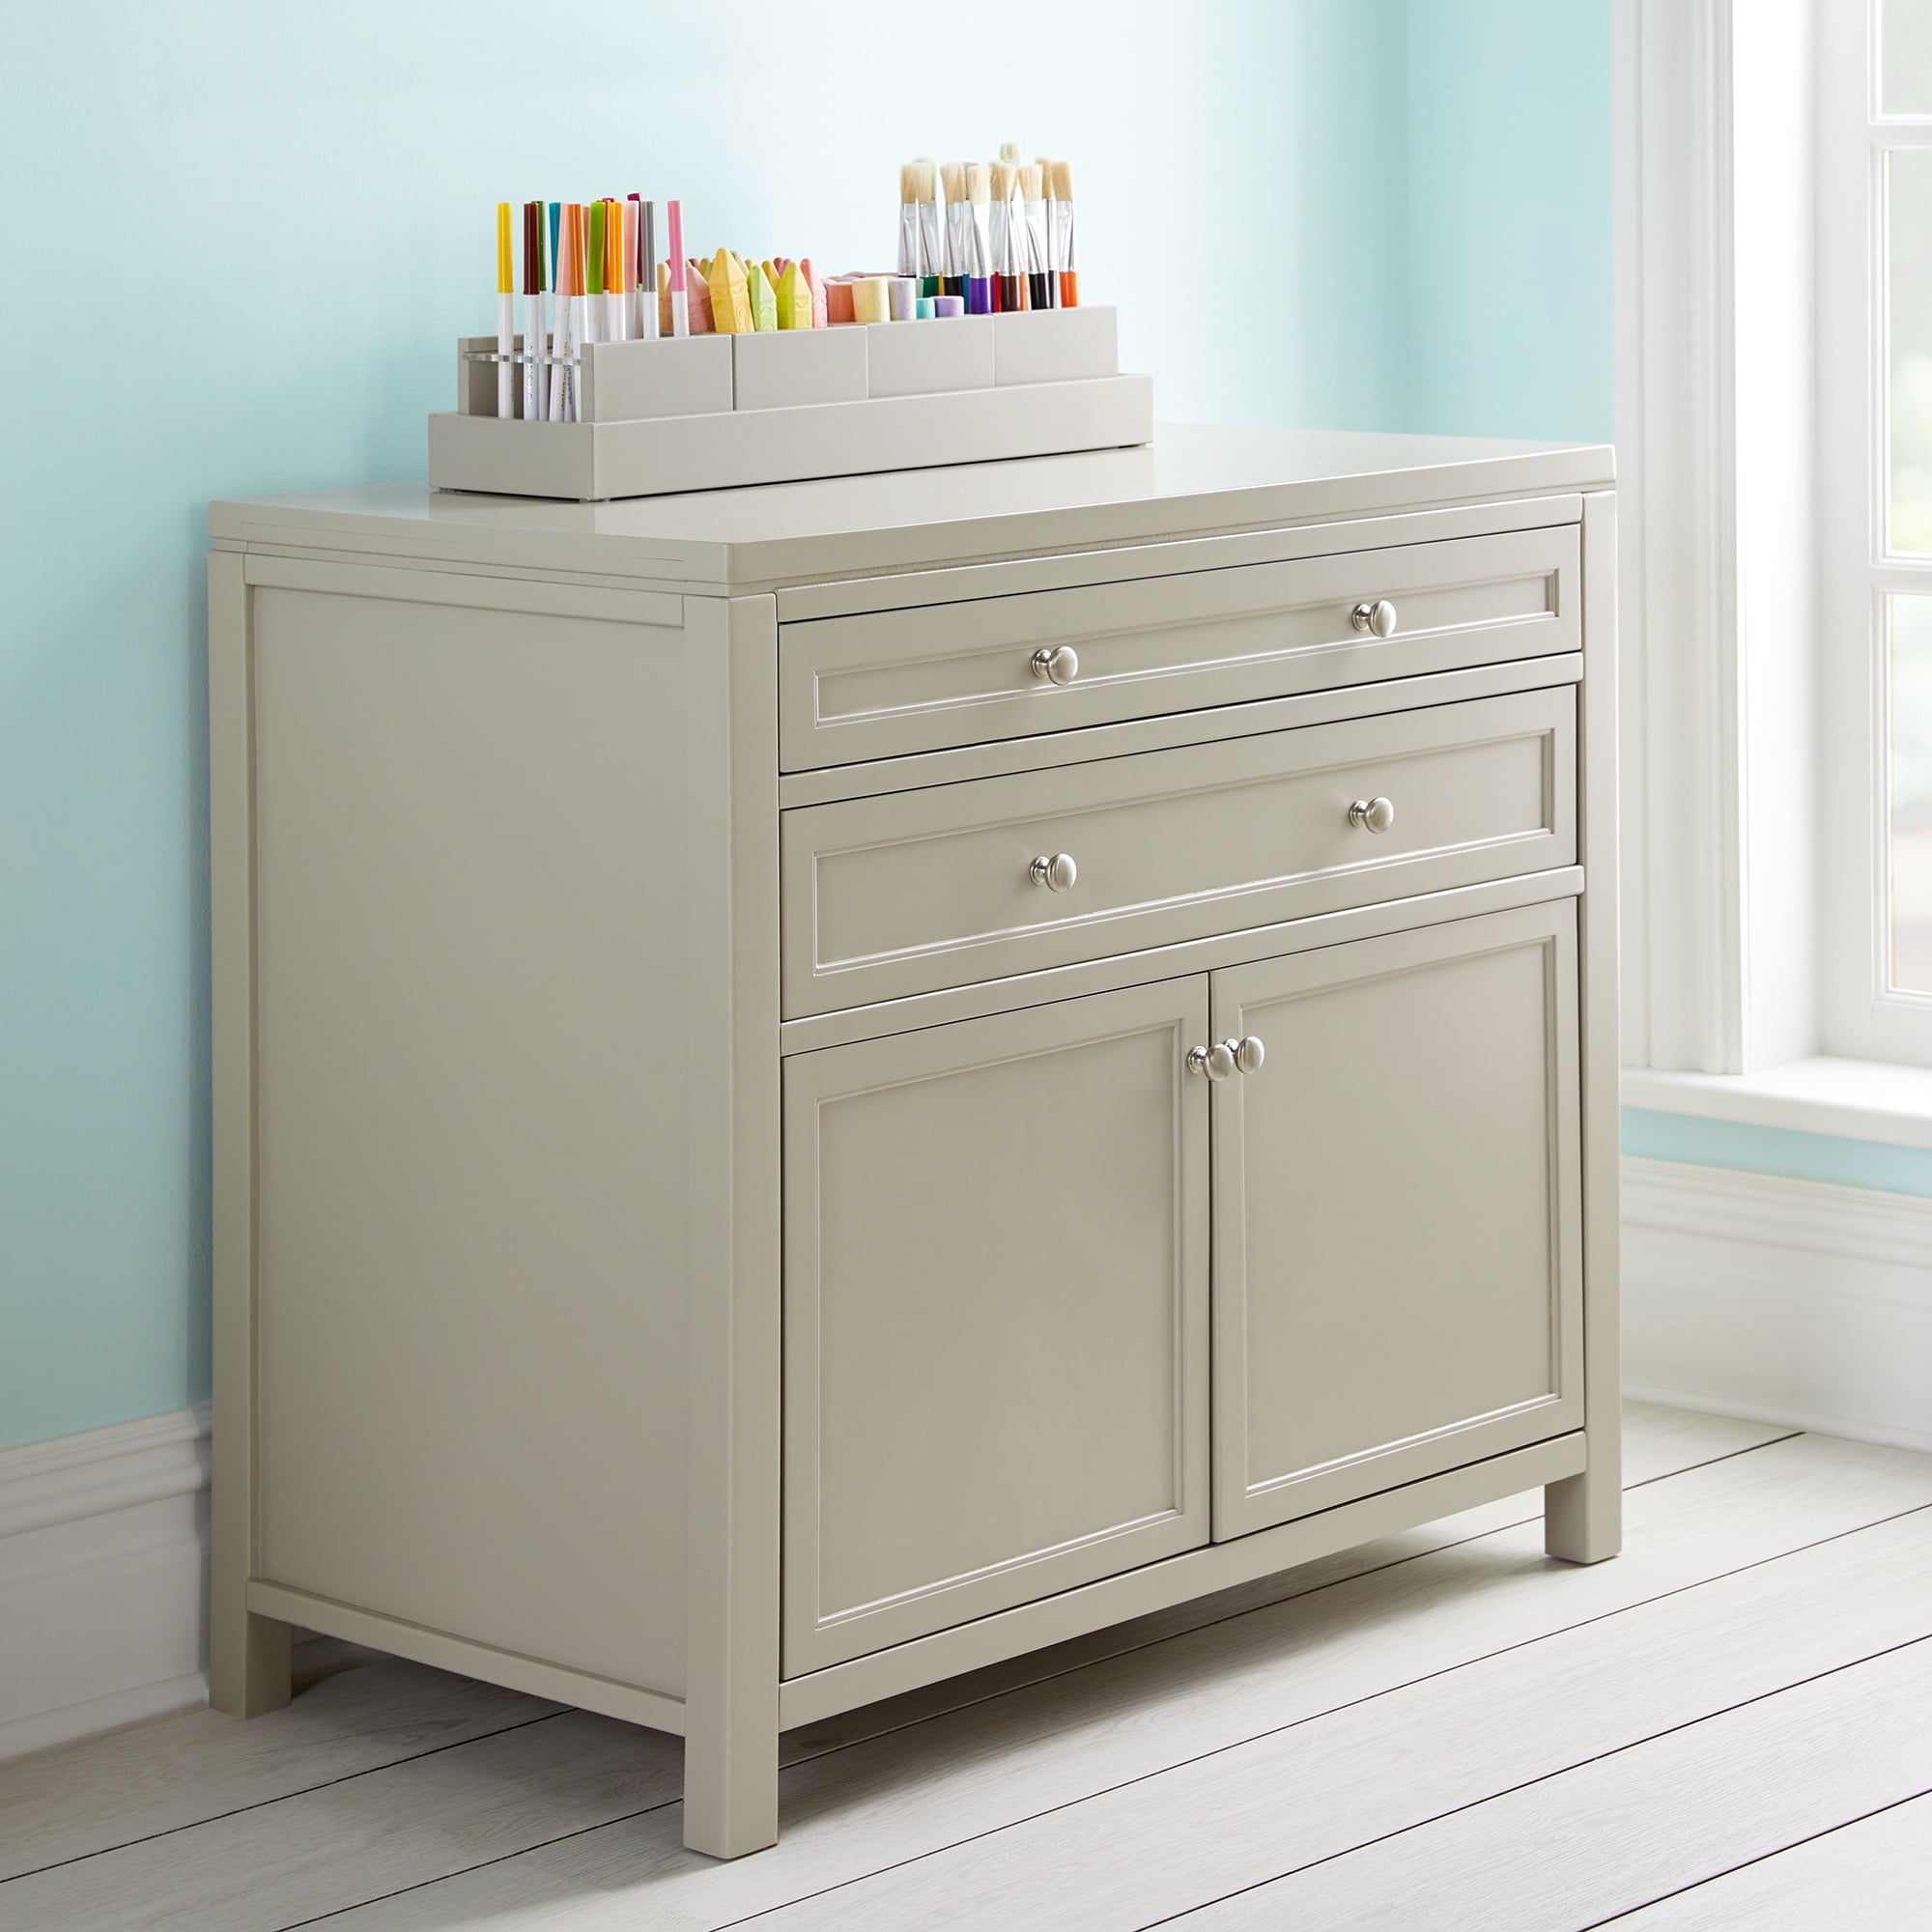 Martha Stewart Crafting Kids' Artwork Storage - Gray, Wooden Art and Crafts  Supply Storage Cabinet with Drawers, Wood Crafting Organization for Paper 